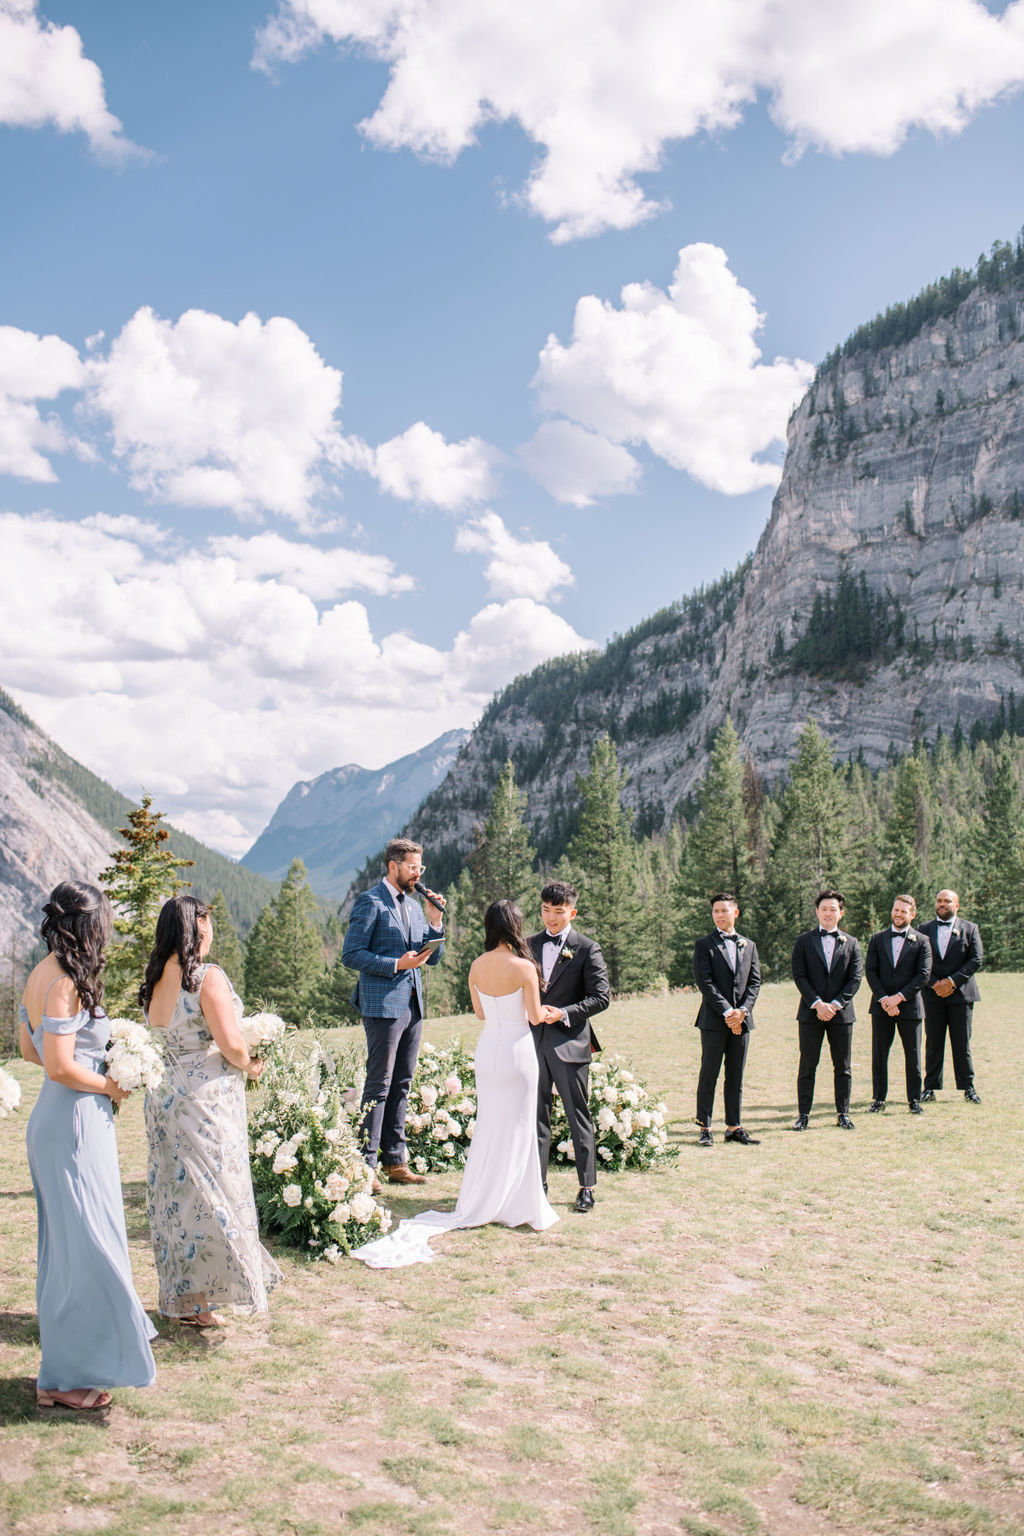 Bride and groom exchange vows during sophisticated mountain wedding in Banff, Alberta, Canada. Summer mountain wedding inspiration. 